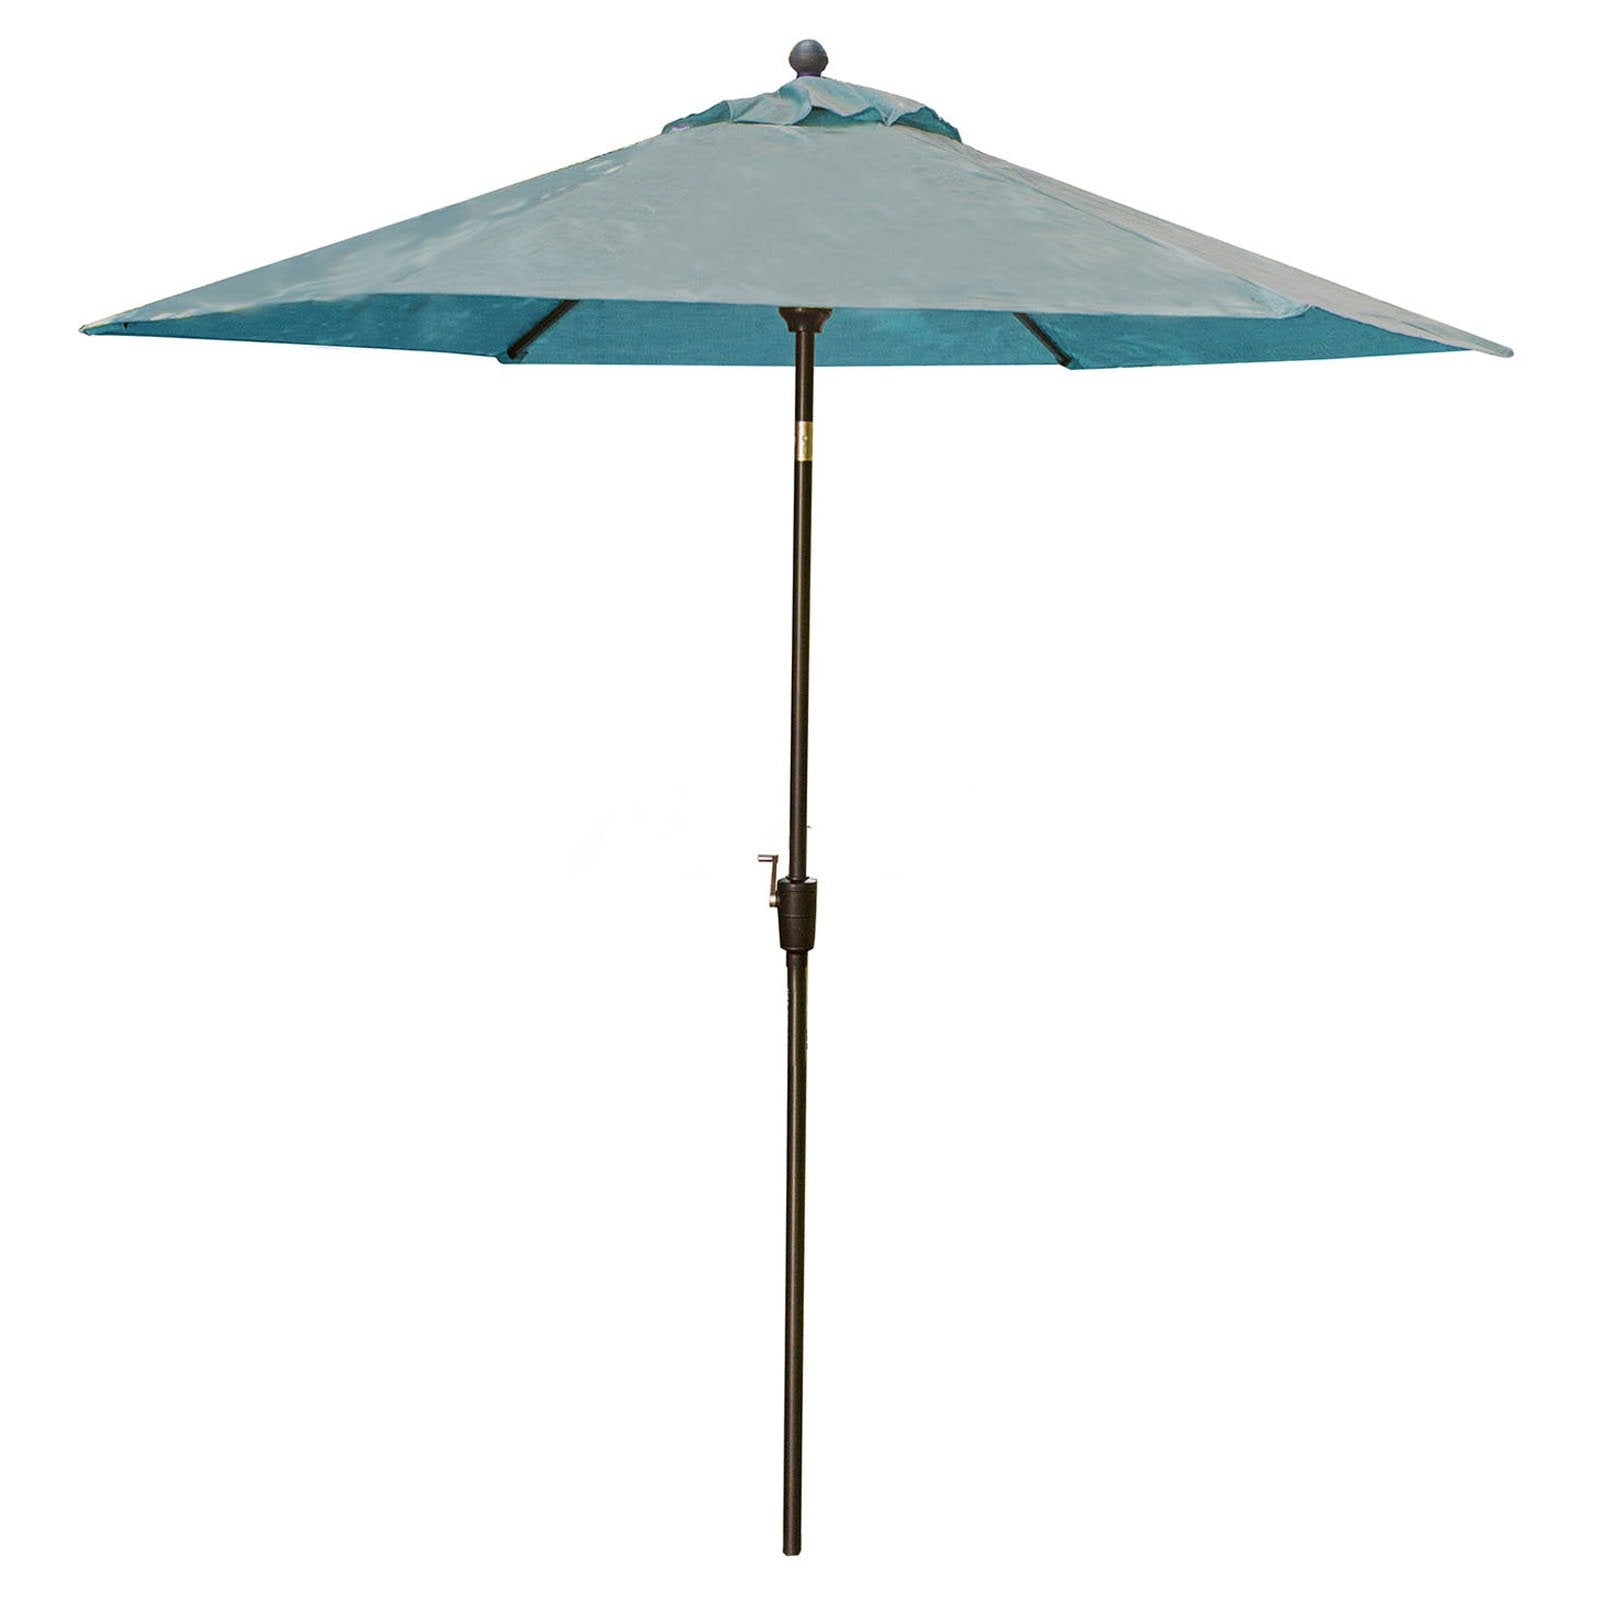 Hanover Outdoor Table Umbrella for the Traditions Dining Collection, Ocean Blue